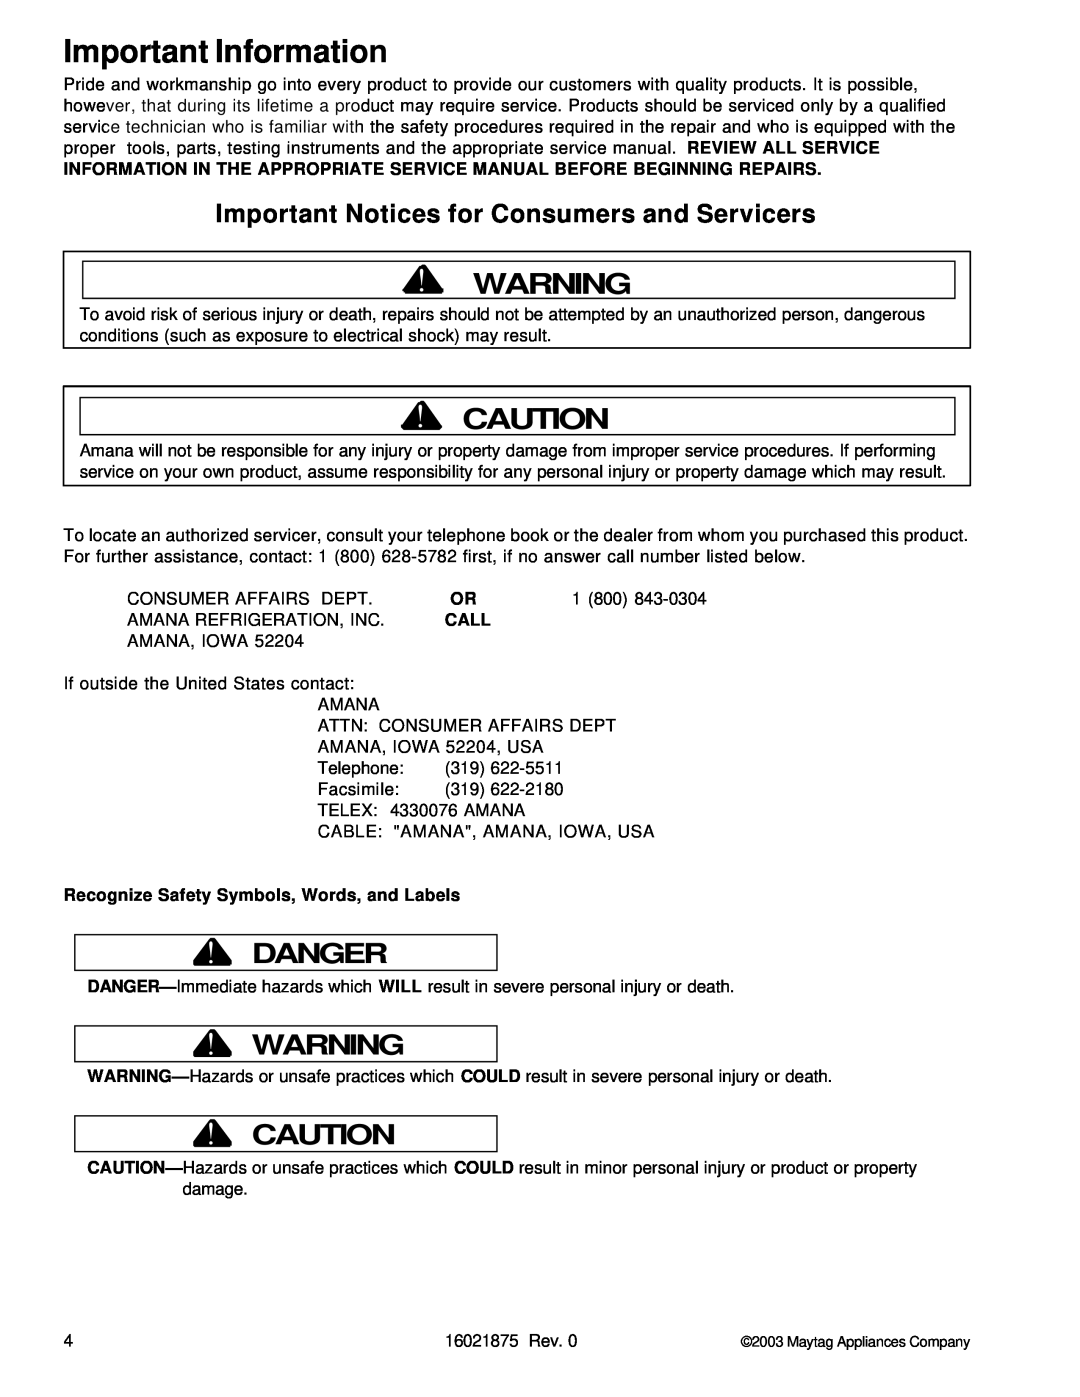 Maytag AOES3030, AOCS3040 manual Important Information, Danger, Important Notices for Consumers and Servicers, Call 